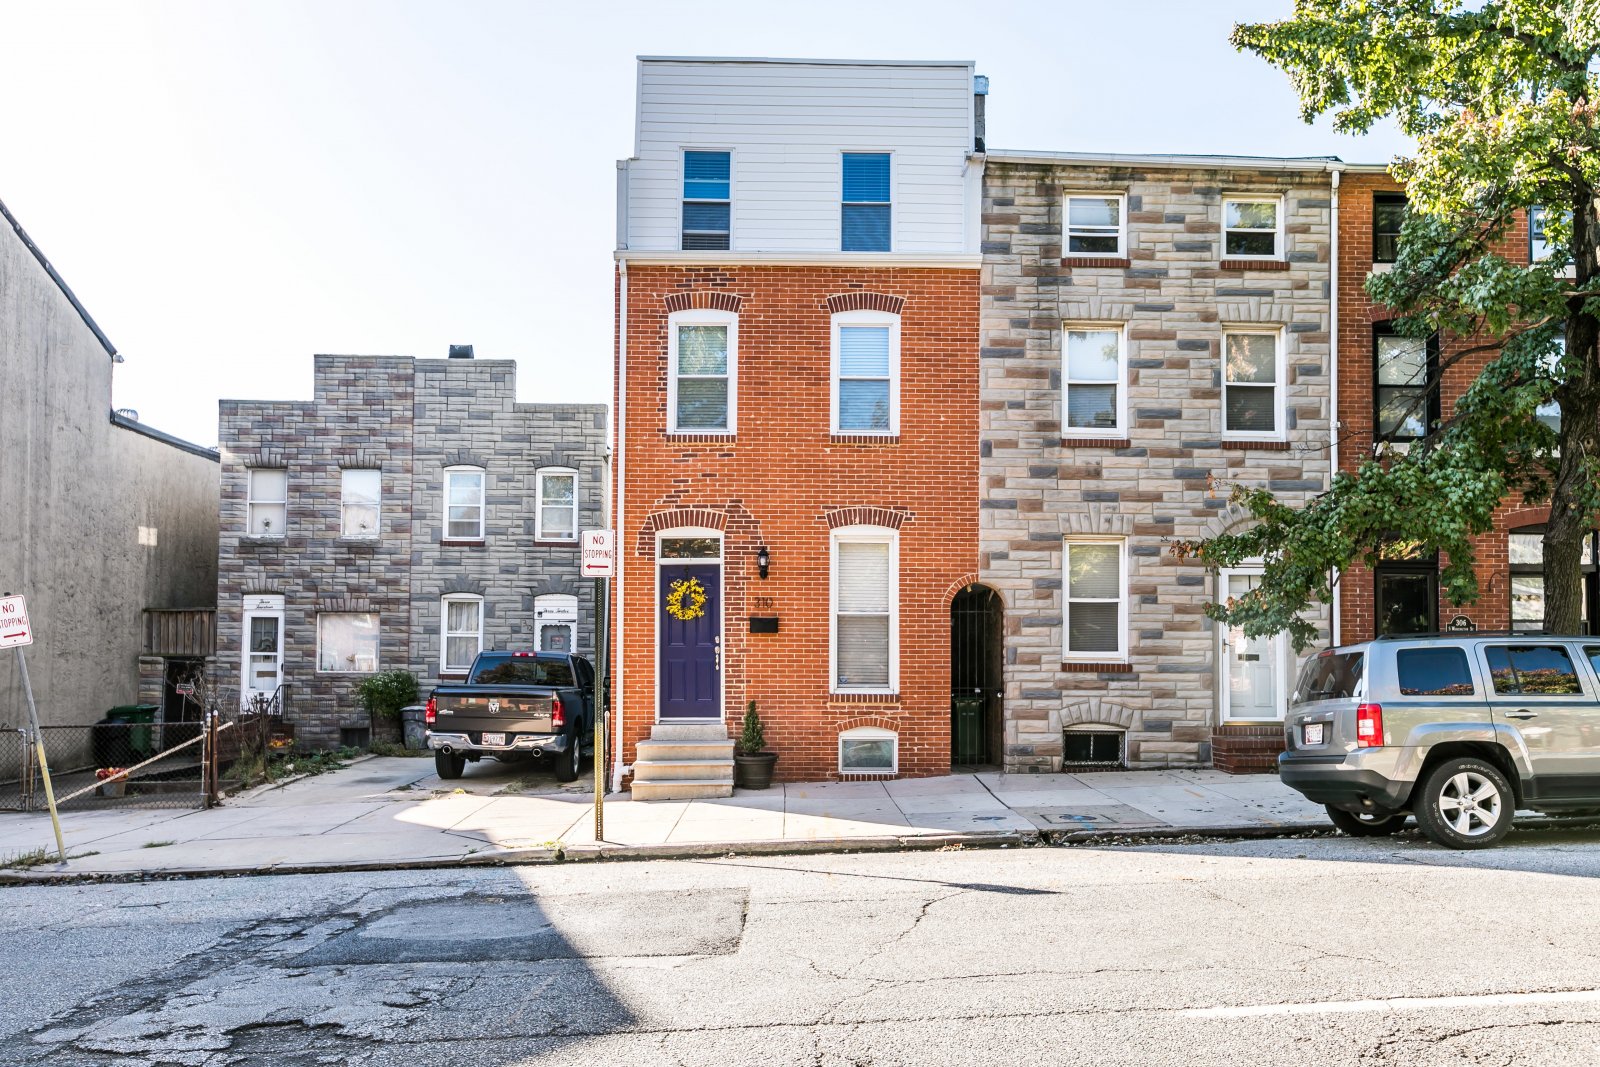 Our listing at 310 S Washington St, Baltimore, MD 21231